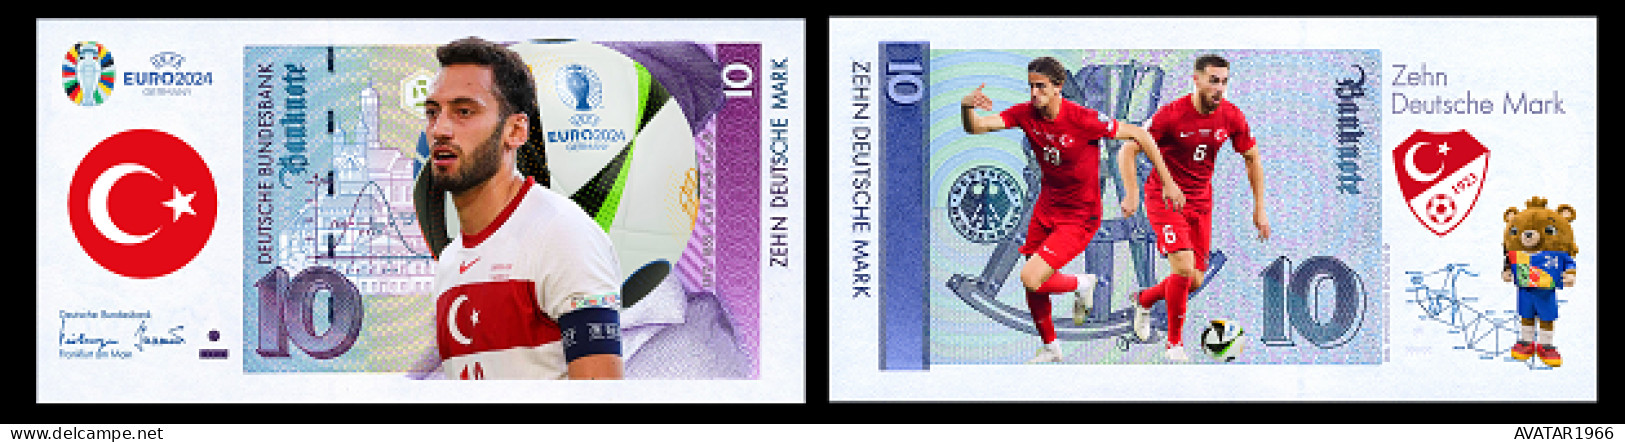 UEFA European Football Championship 2024 Qualified Country Turkey 8 Pieces Germany Fantasy Paper Money - [15] Commemoratives & Special Issues